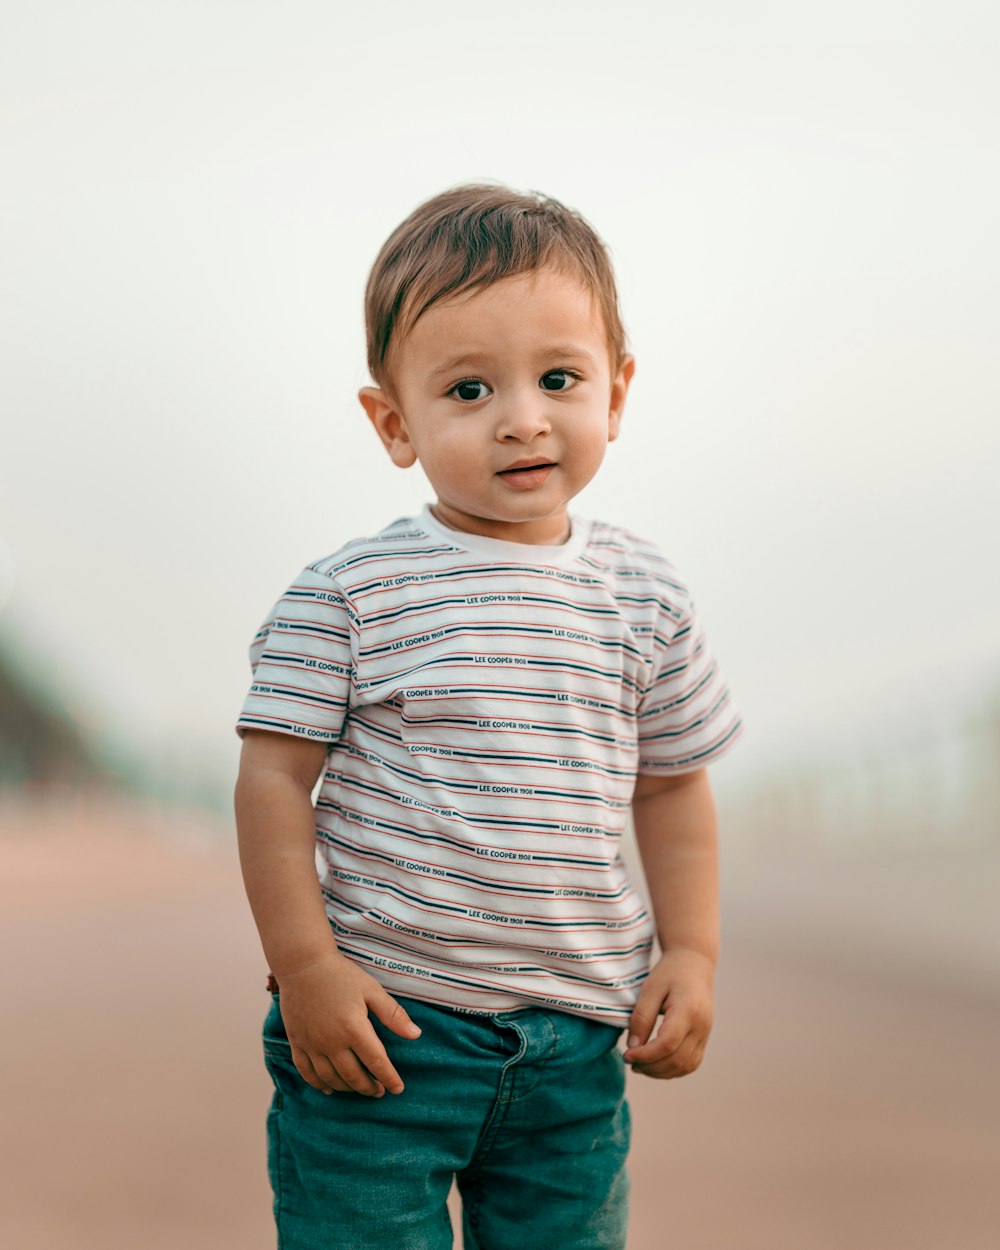 Cute Kid Pictures | Download Free Images on Unsplash